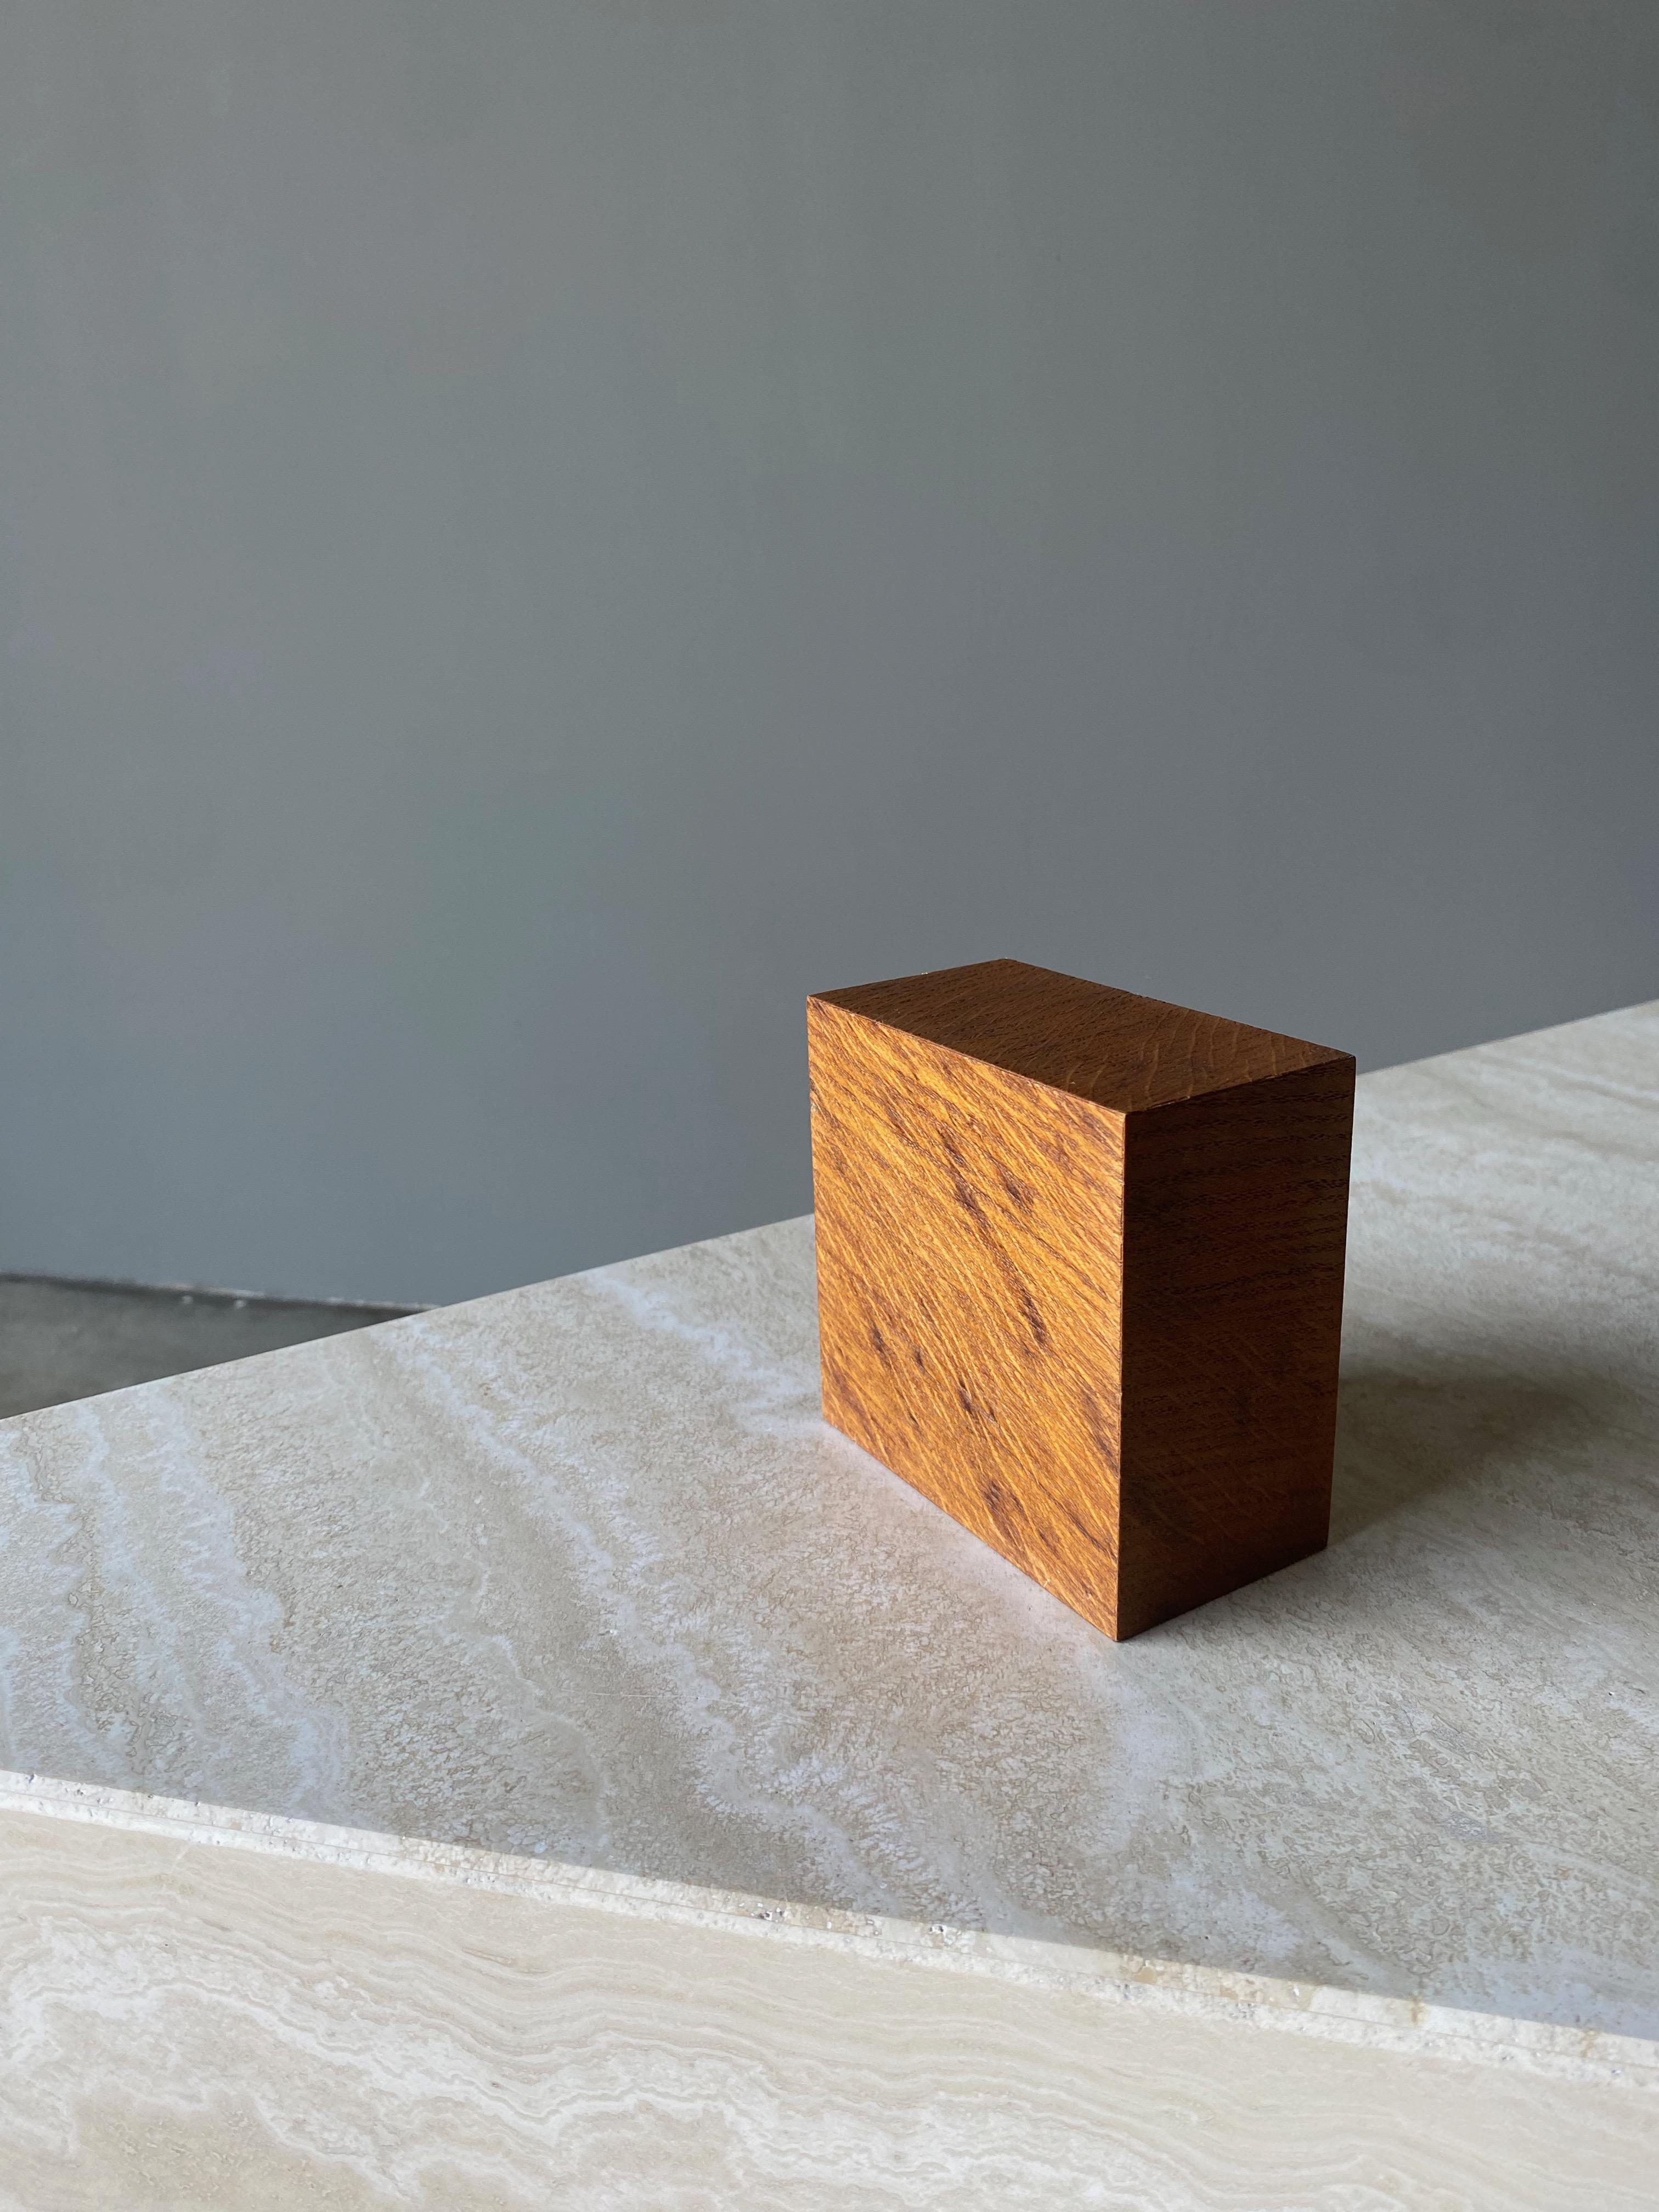 Laminate Walnut Display Cube, 1960s For Sale